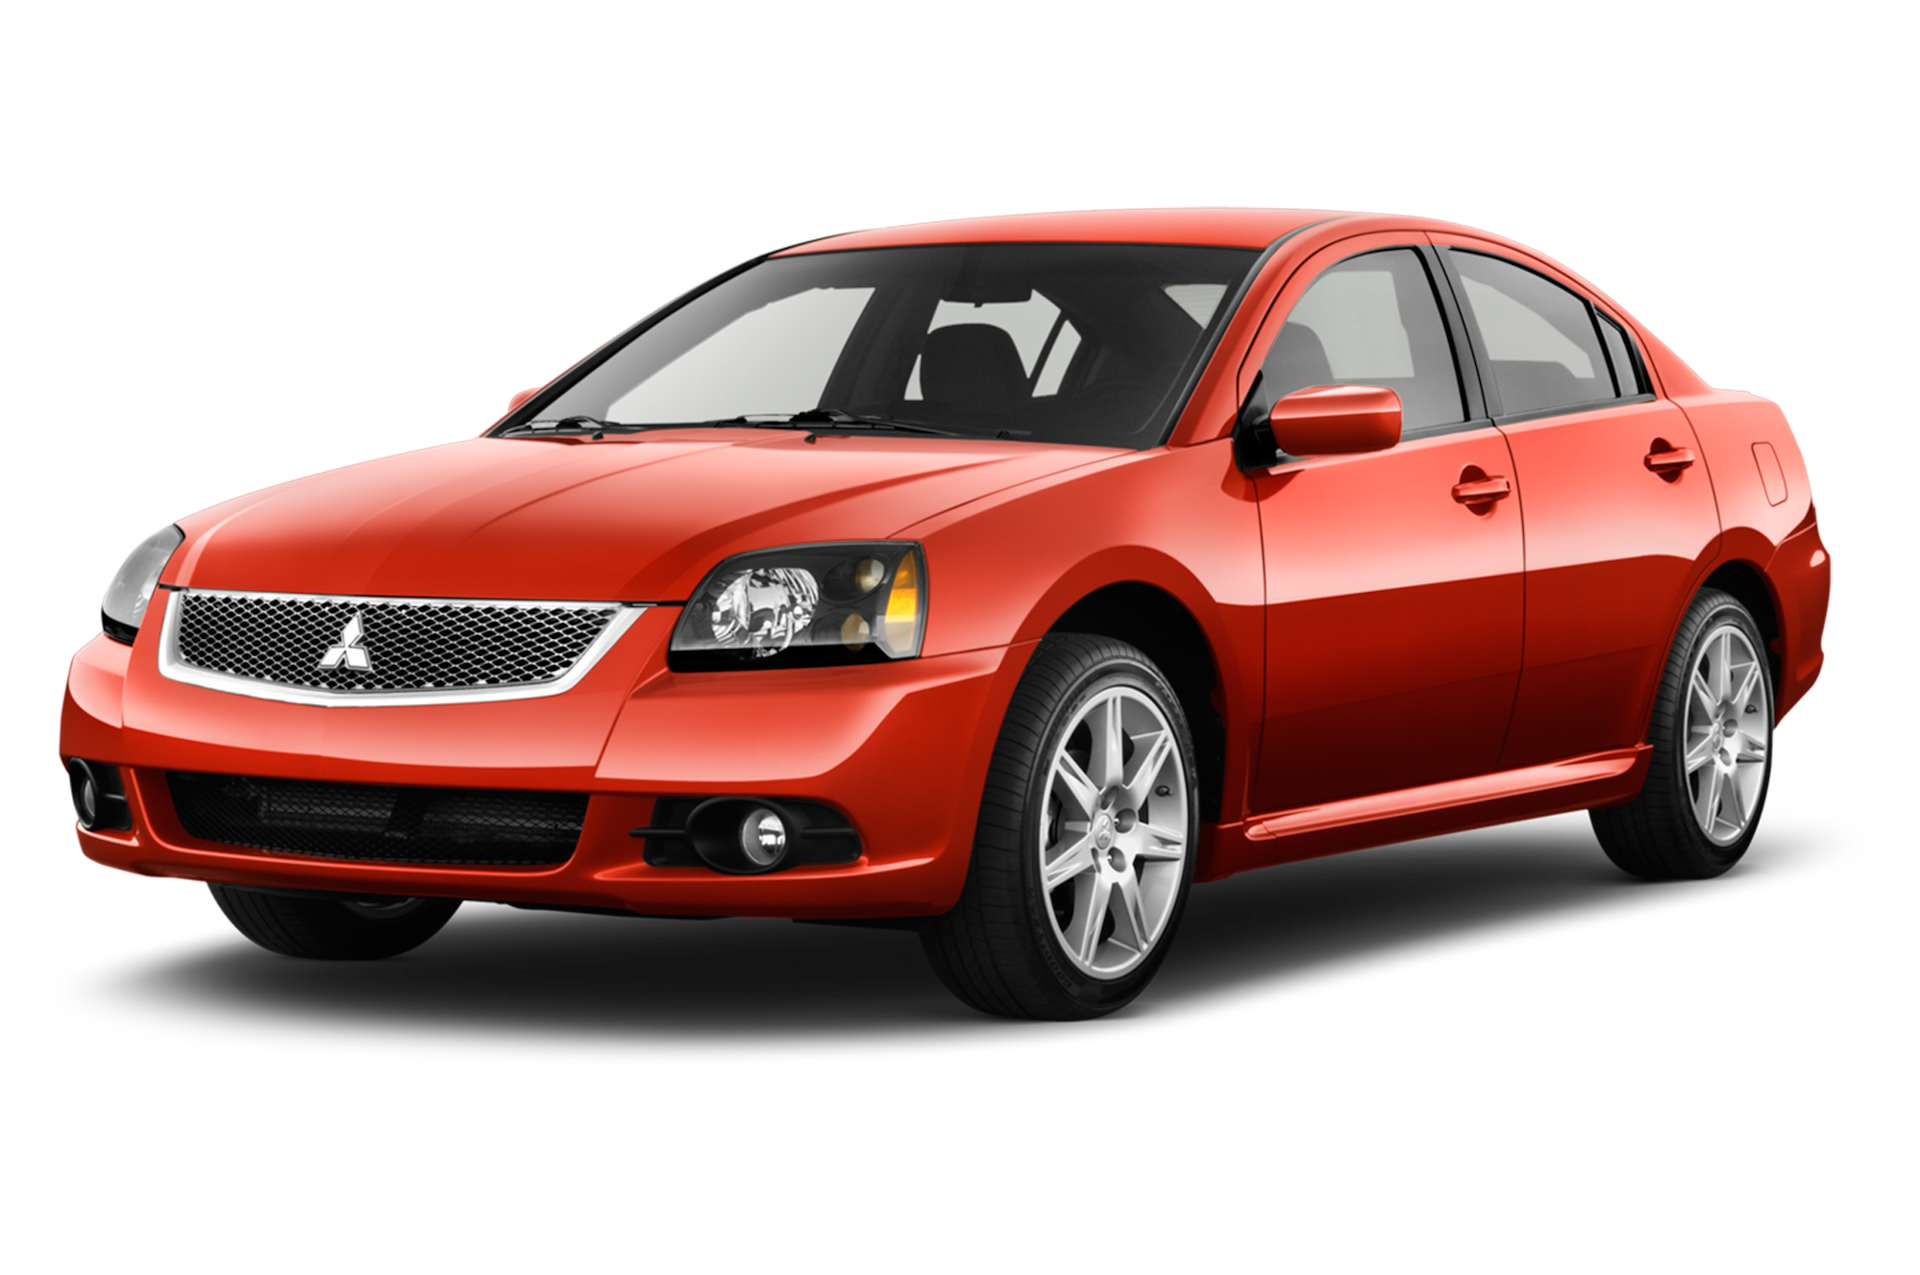 2012 Mitsubishi Galant Prices, Reviews, and Photos - MotorTrend